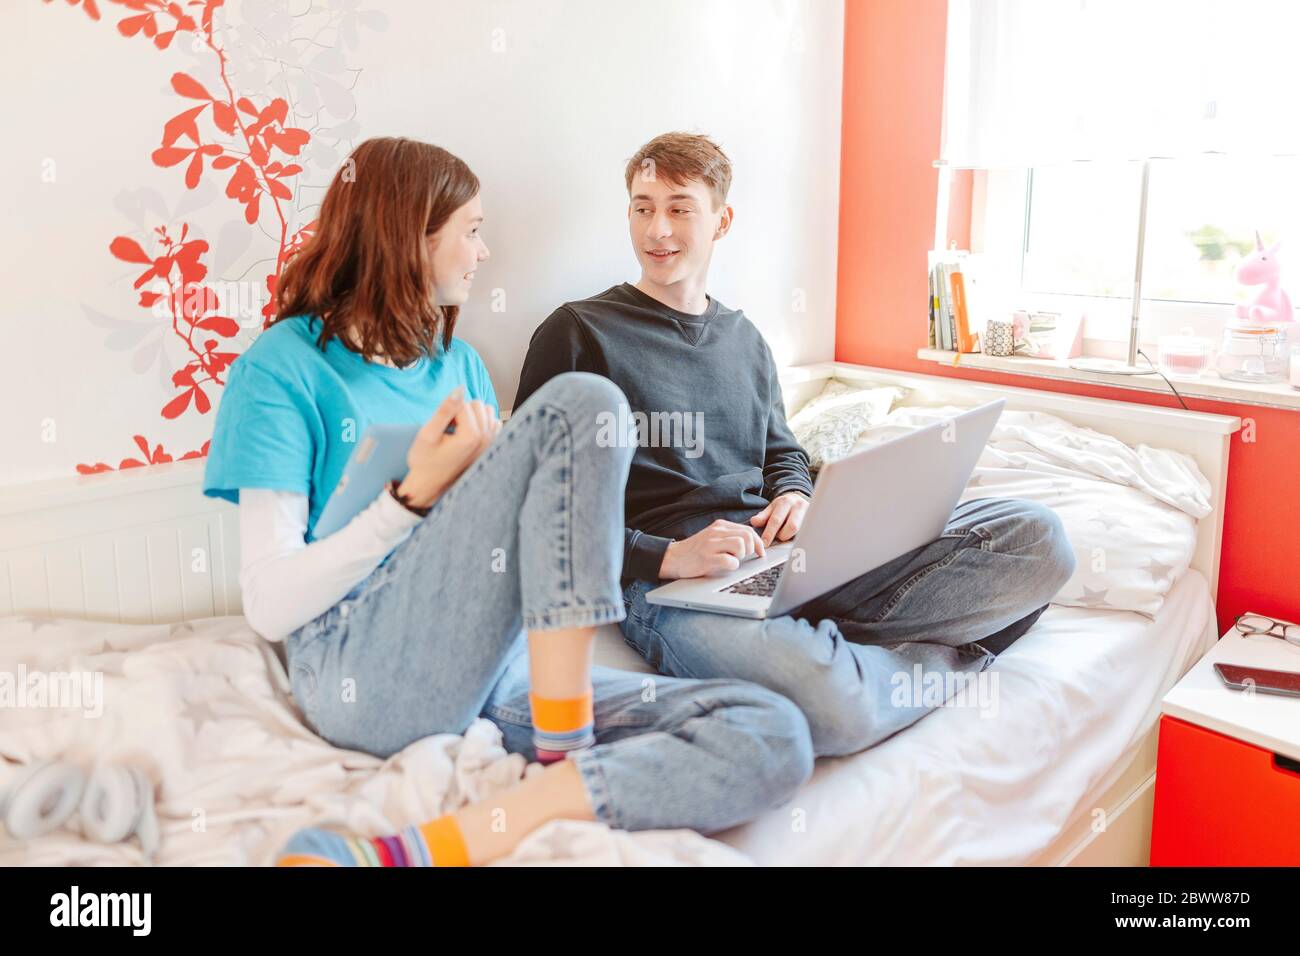 Teenage couple sitting on bed with laptop and digital tablet Stock Photo